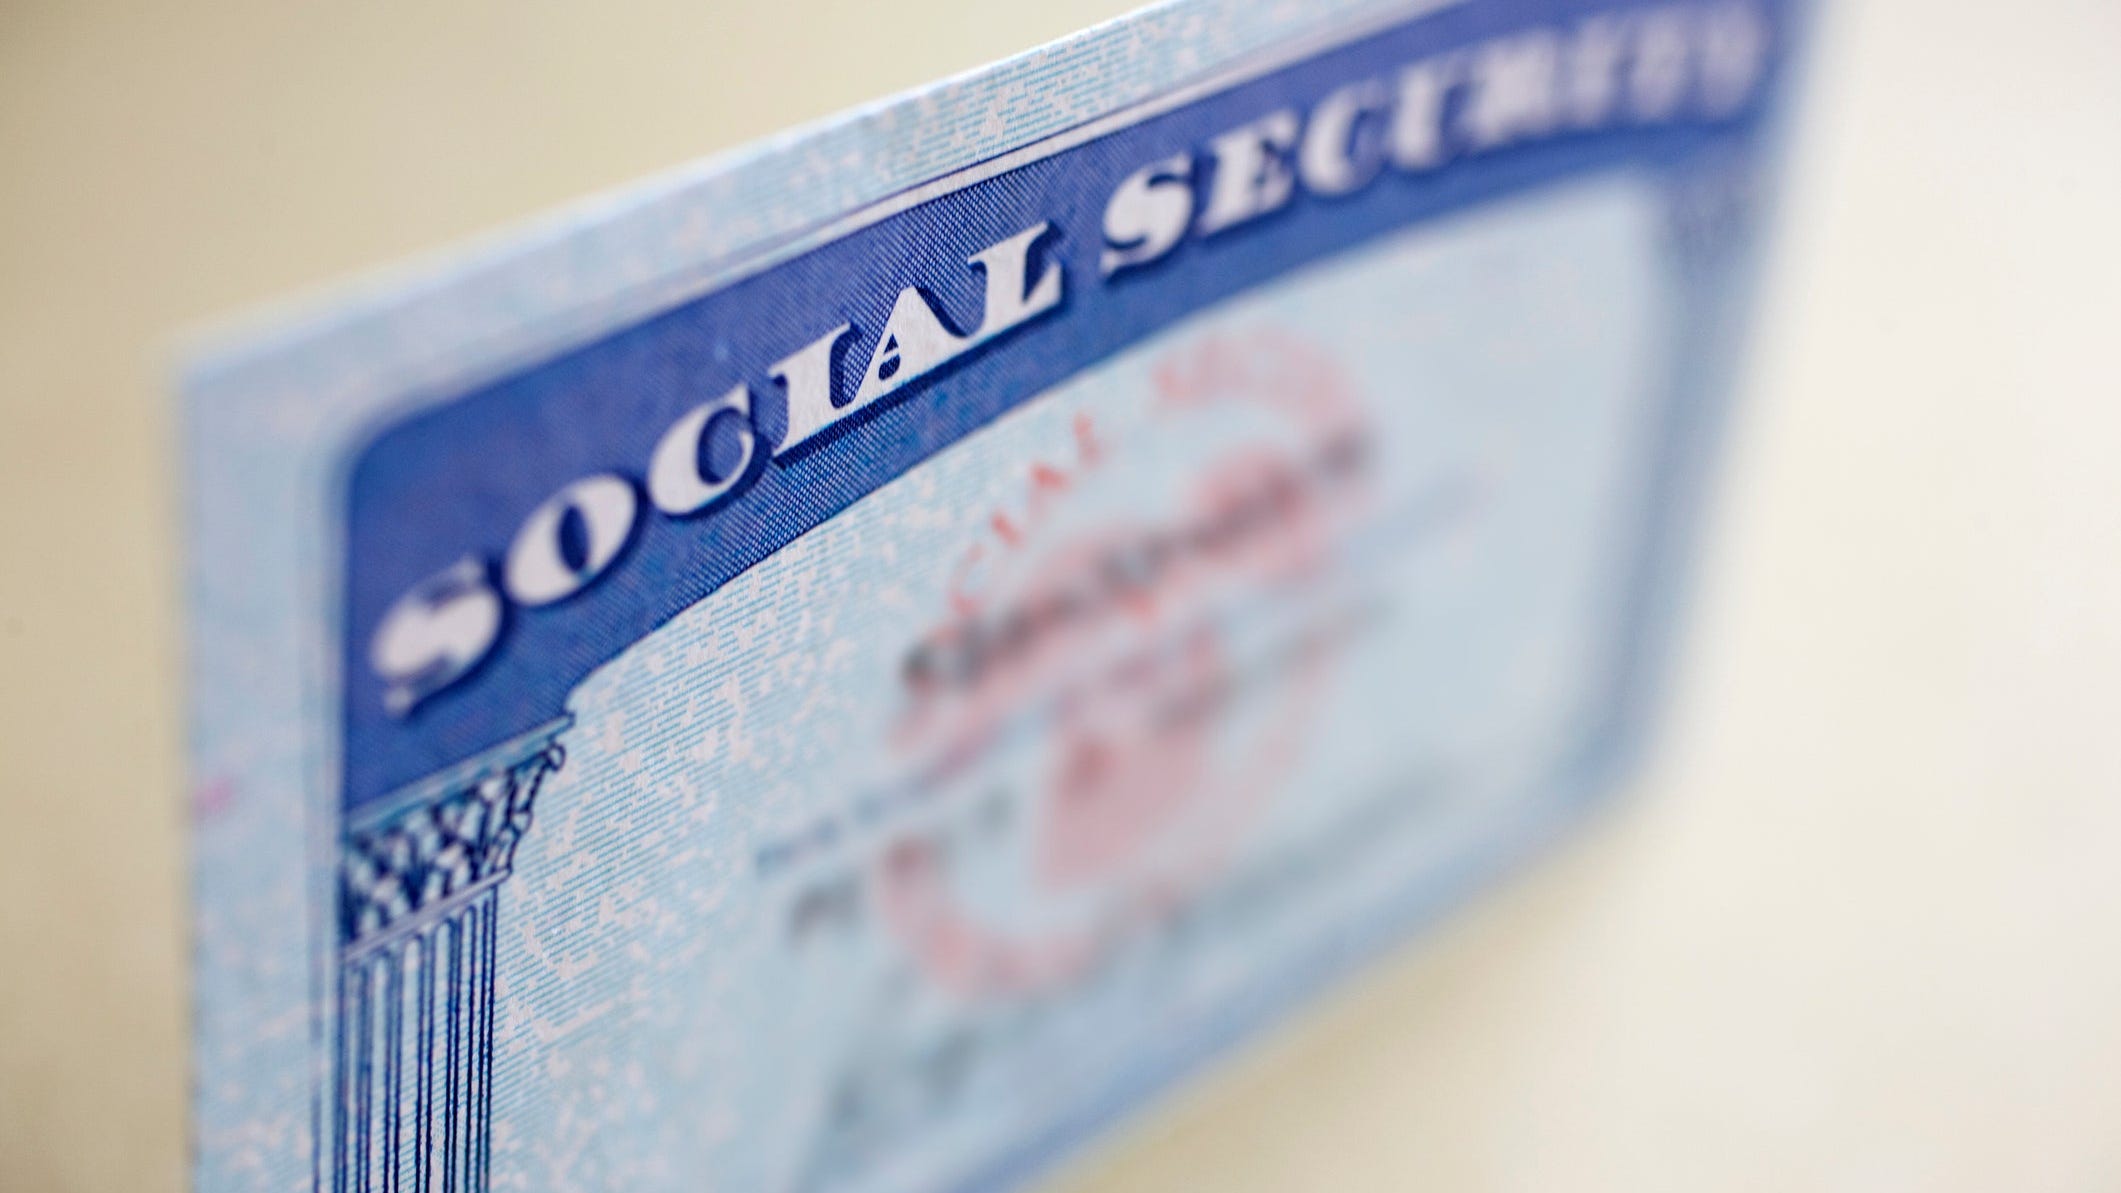 Social Security cuts expected, but don't let them wreck retirement